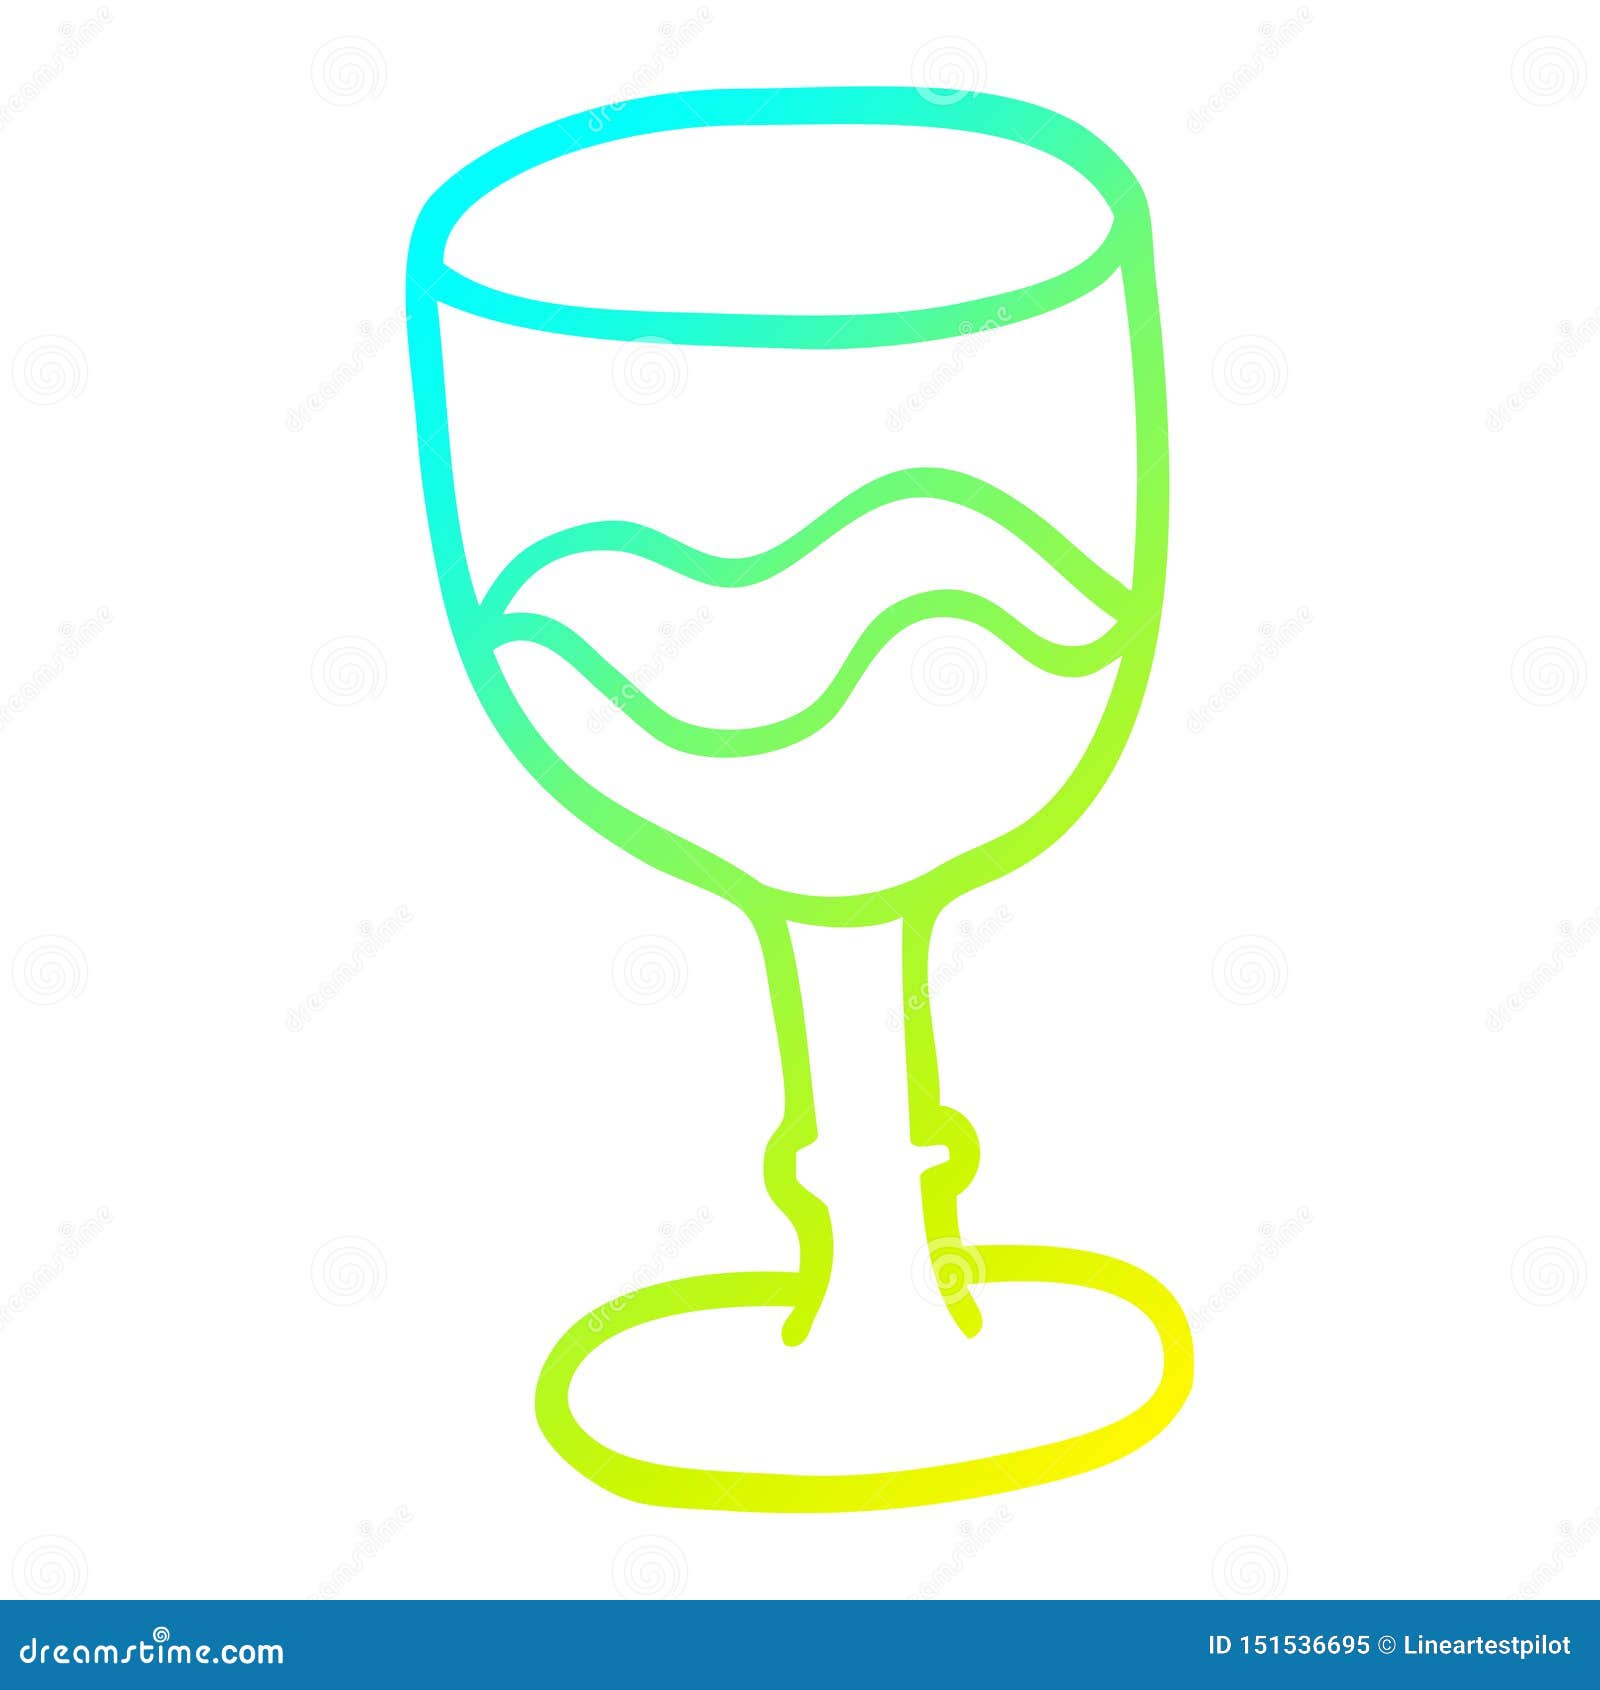 Red Wine Glass Drink Cartoon Cold Line Gradient Spectrum Doodle Drawing  Simple Art Illustration Hand Drawn Scribble Funny Crazy Stock Illustrations  – 2 Red Wine Glass Drink Cartoon Cold Line Gradient Spectrum